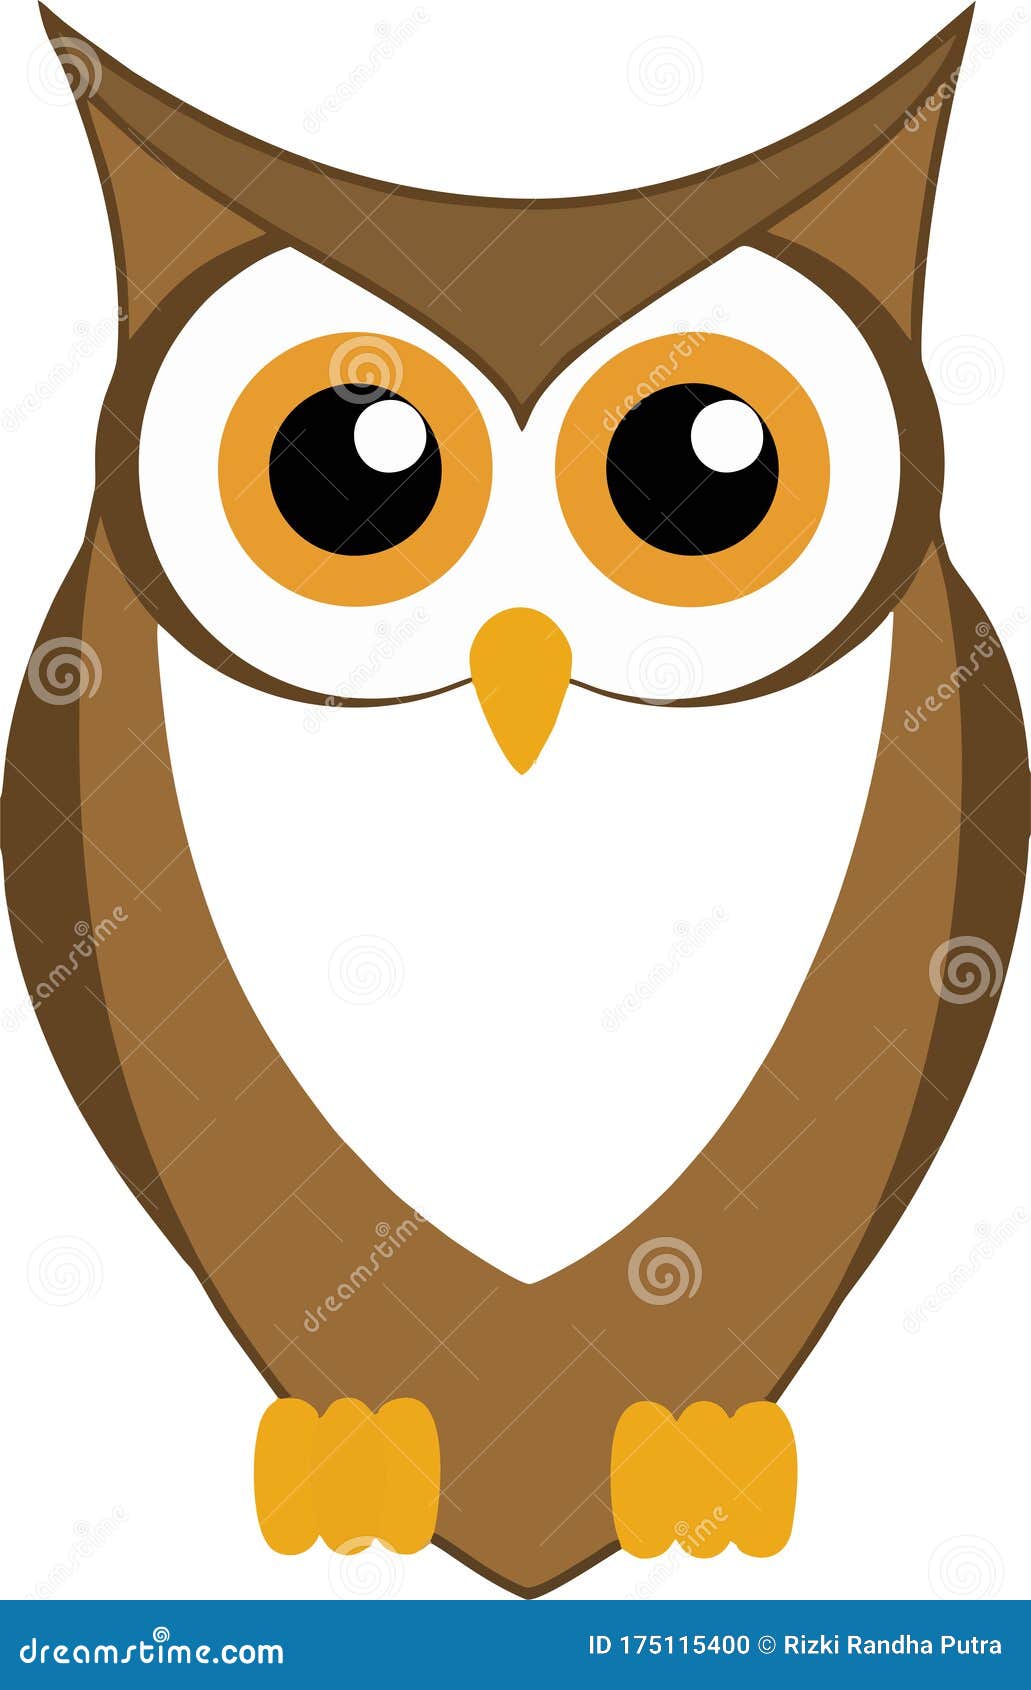 High Quality Vector Cute Owls Stock Vector - Illustration of animation,  designs: 175115400